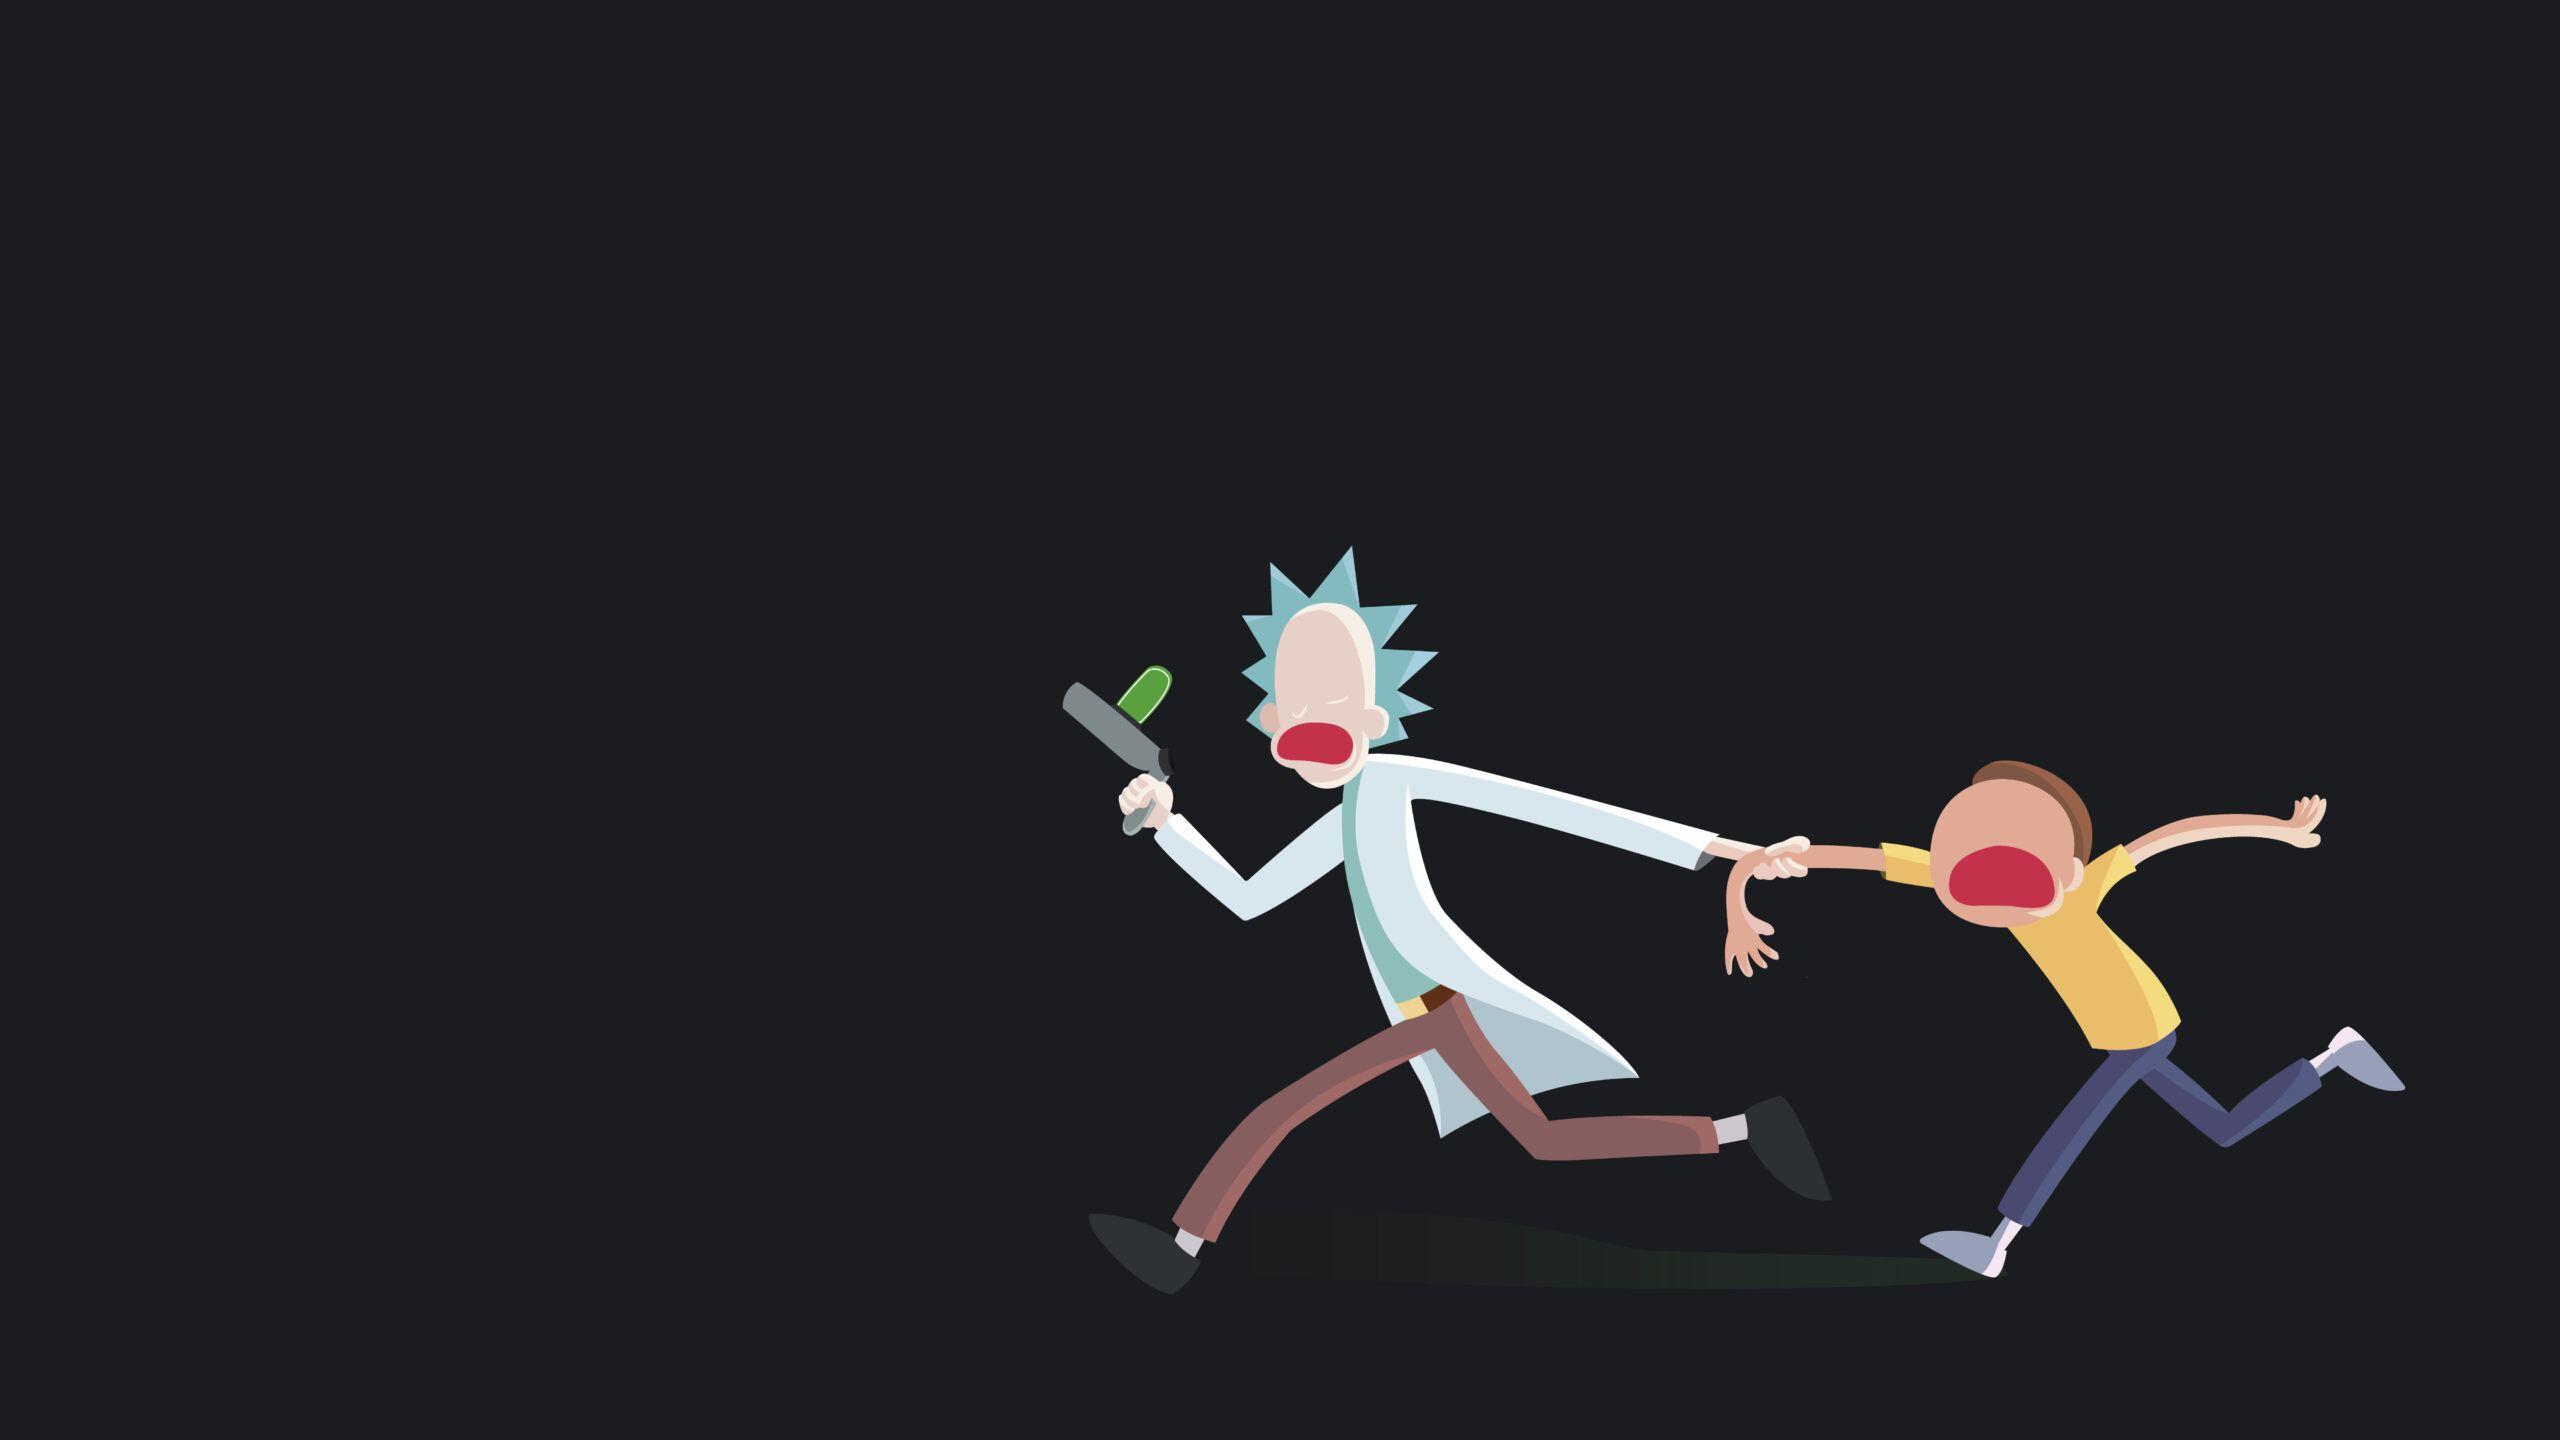 2560 x 1440 · jpeg - Coolest PC Minimalist Rick And Morty Wallpapers - Wallpaper Cave